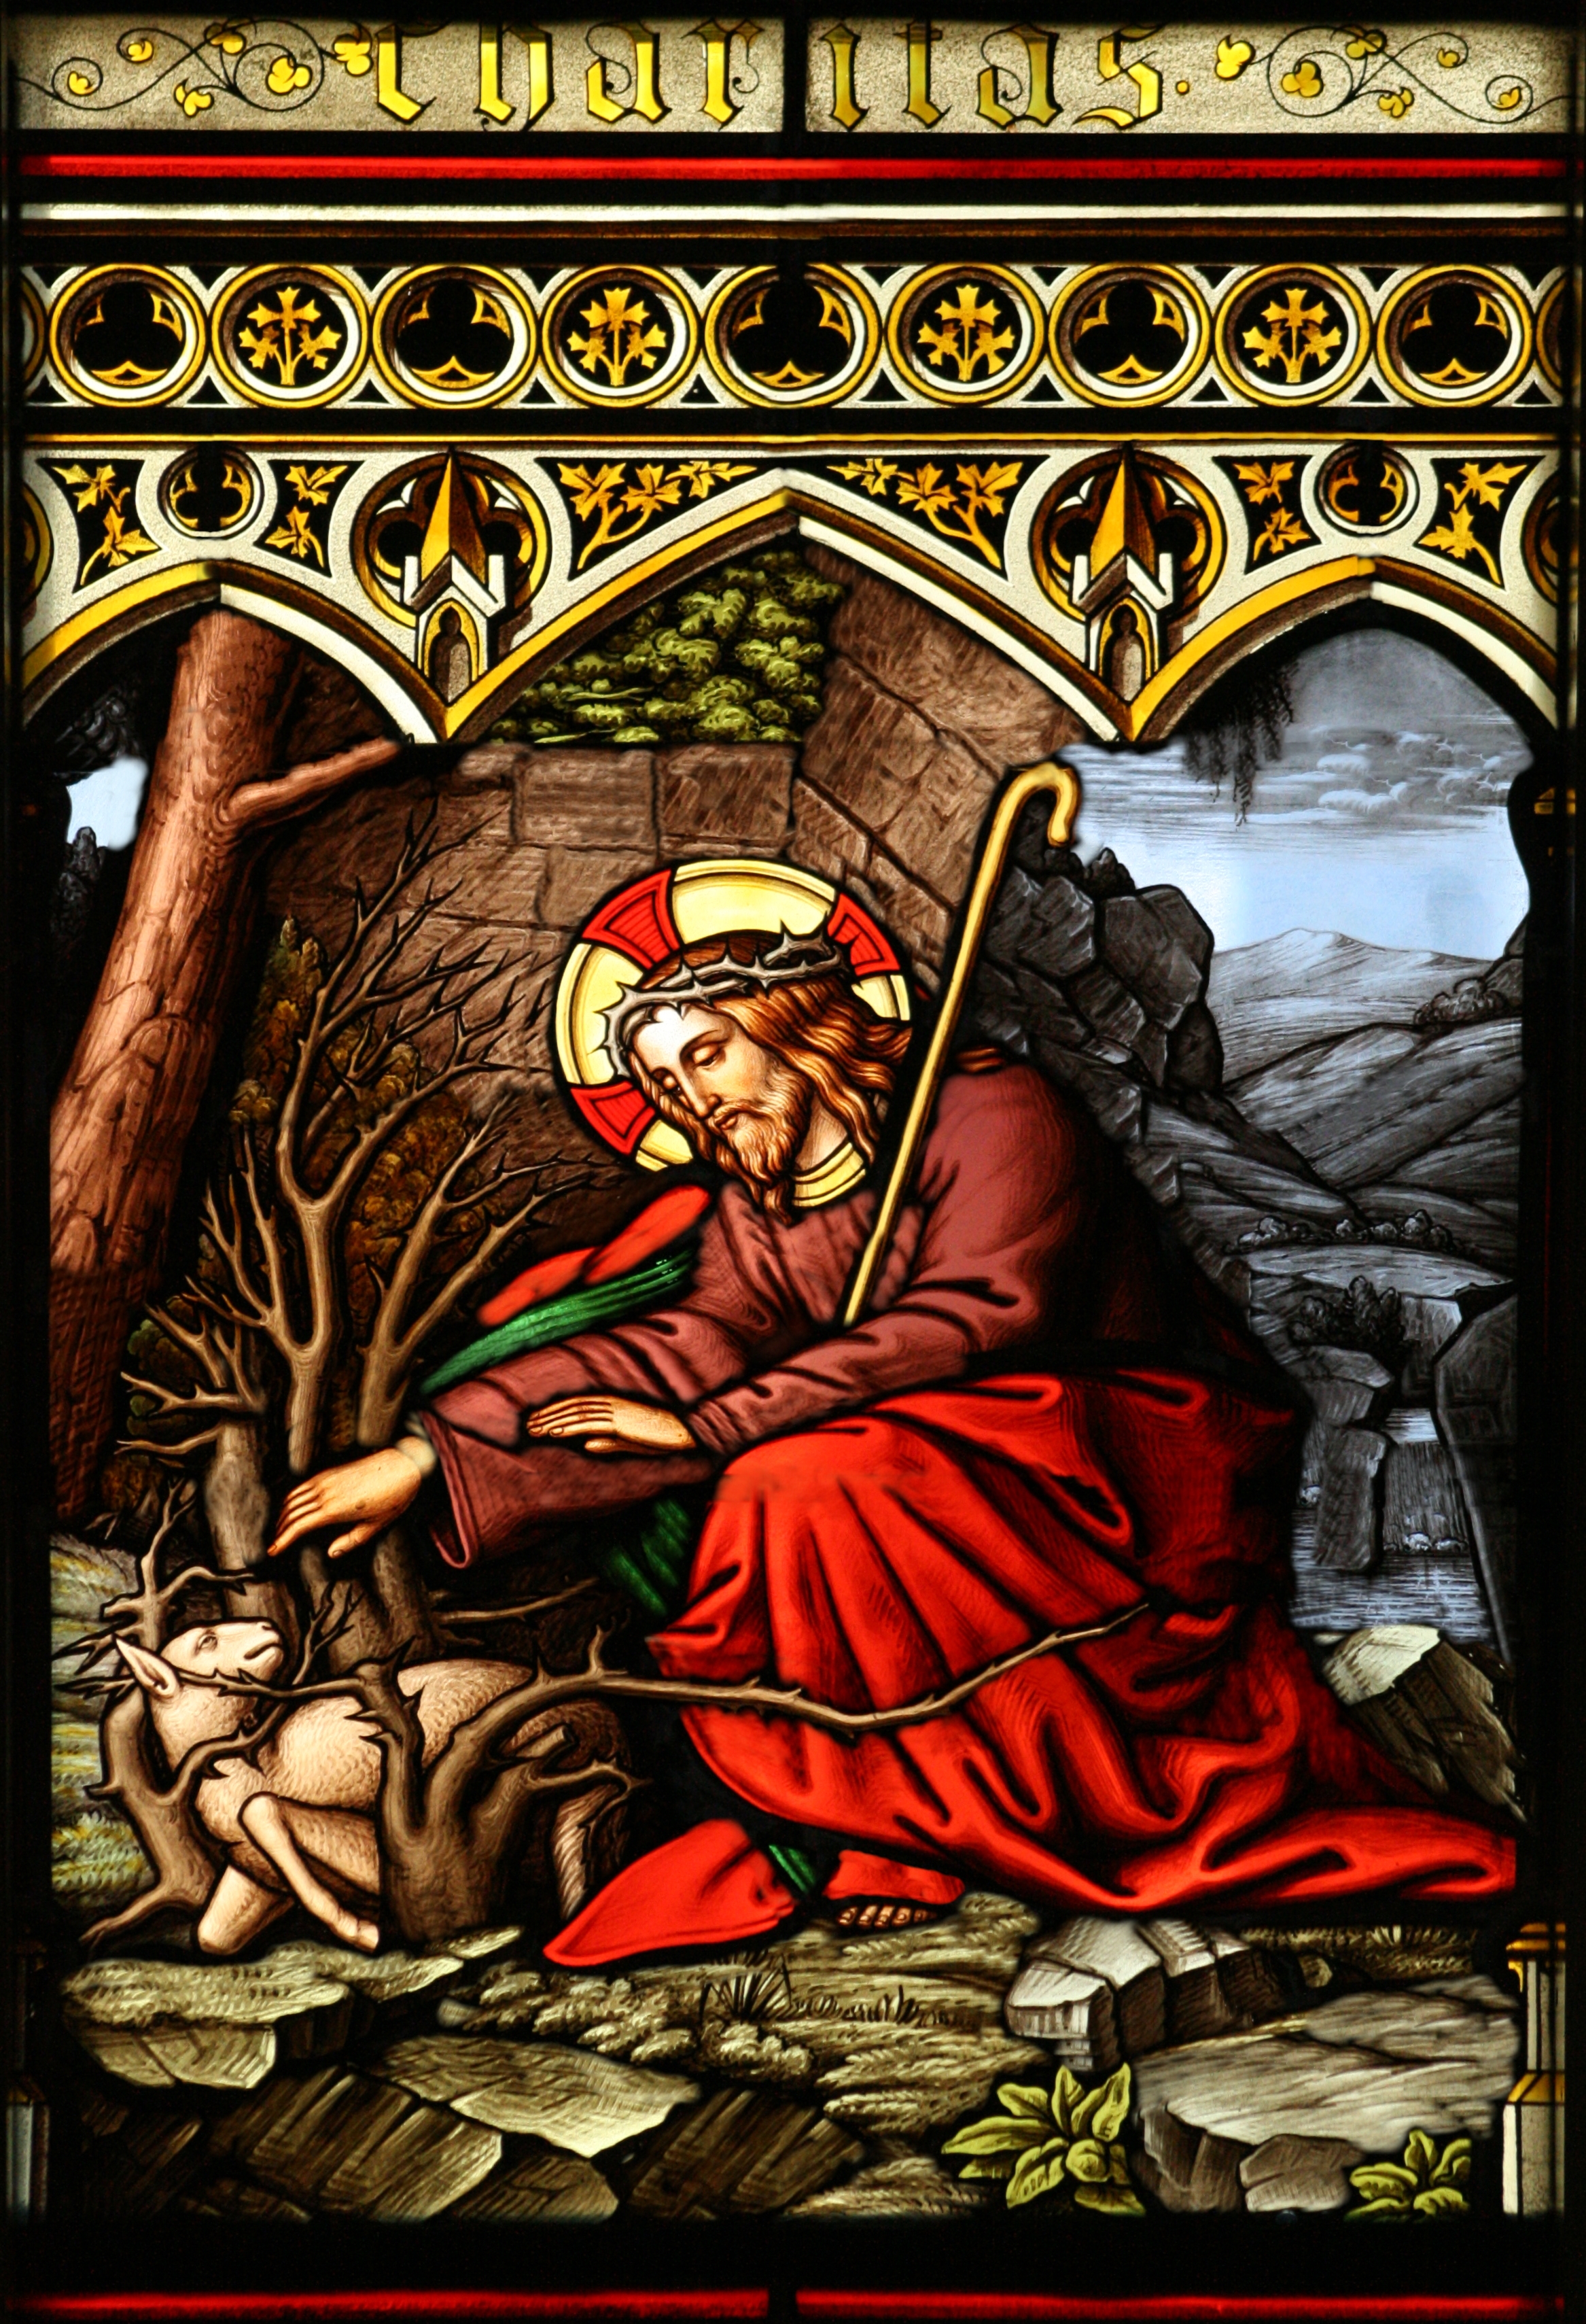 Jesus_Rescuing_a_Lamb_Caught_in_Thorns